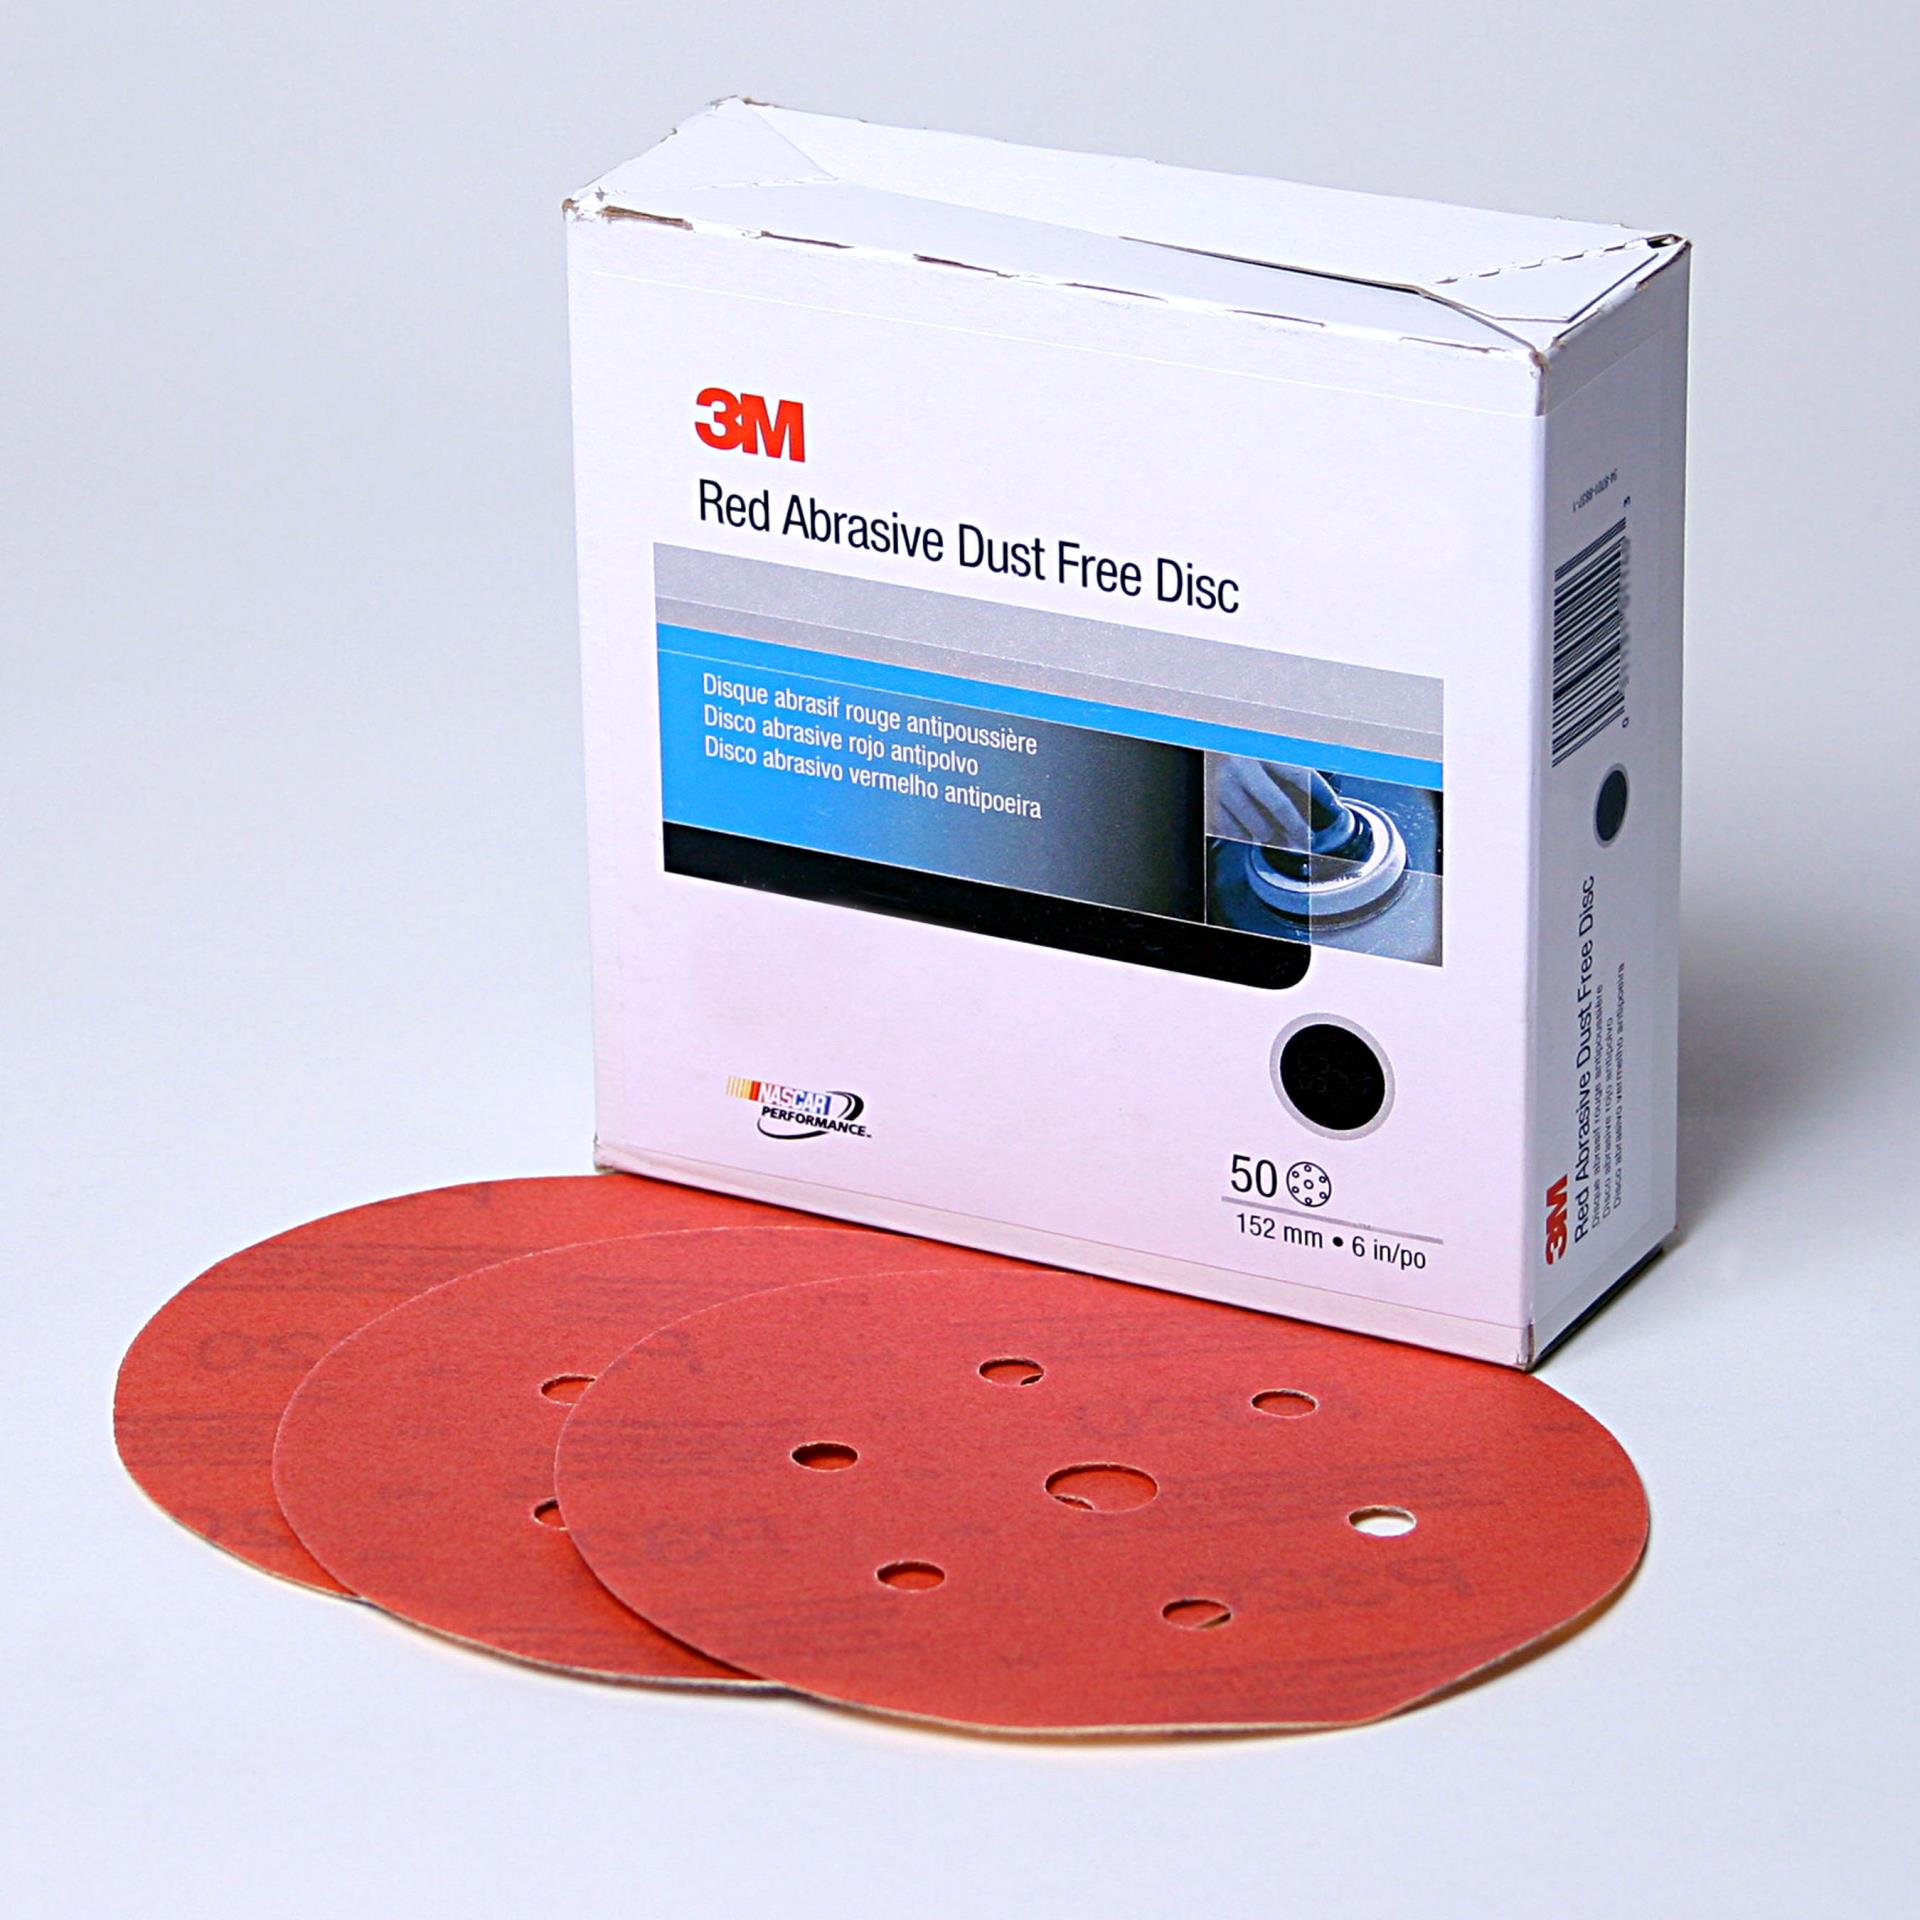 https://www.e-aircraftsupply.com/ItemImages/64/7000028264_3M_Red_Abrasive_Hookit_Disc_Dust_Free.jpg